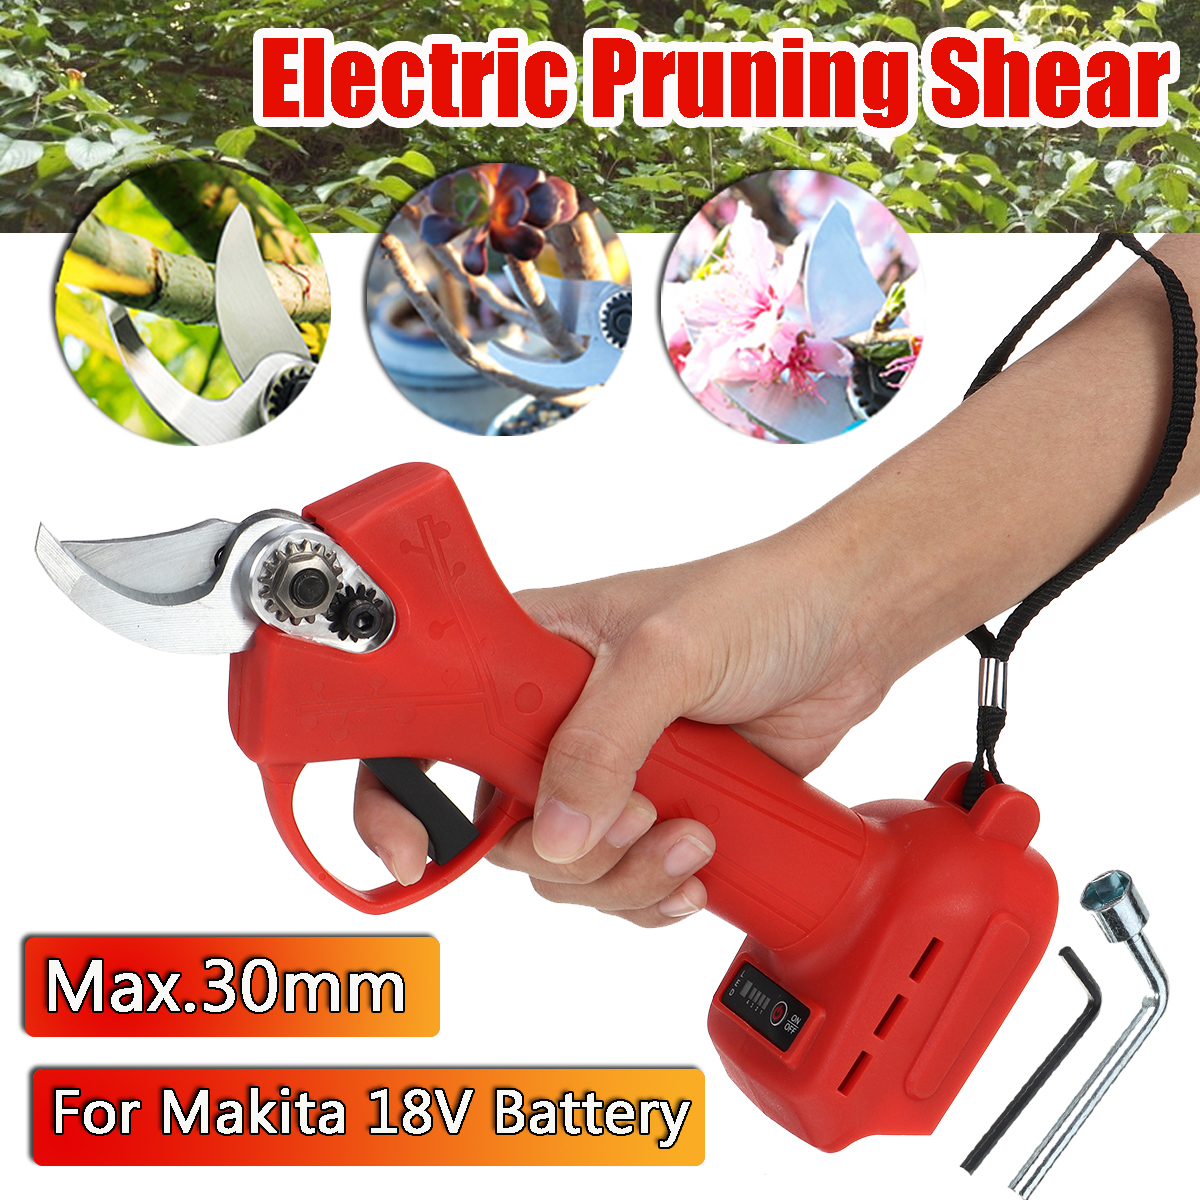 Wireless-Electric-Pruning-Shears-Secateur-Branch-Cutter-Scissors-For-Makita-18V-Battery-1740226-1